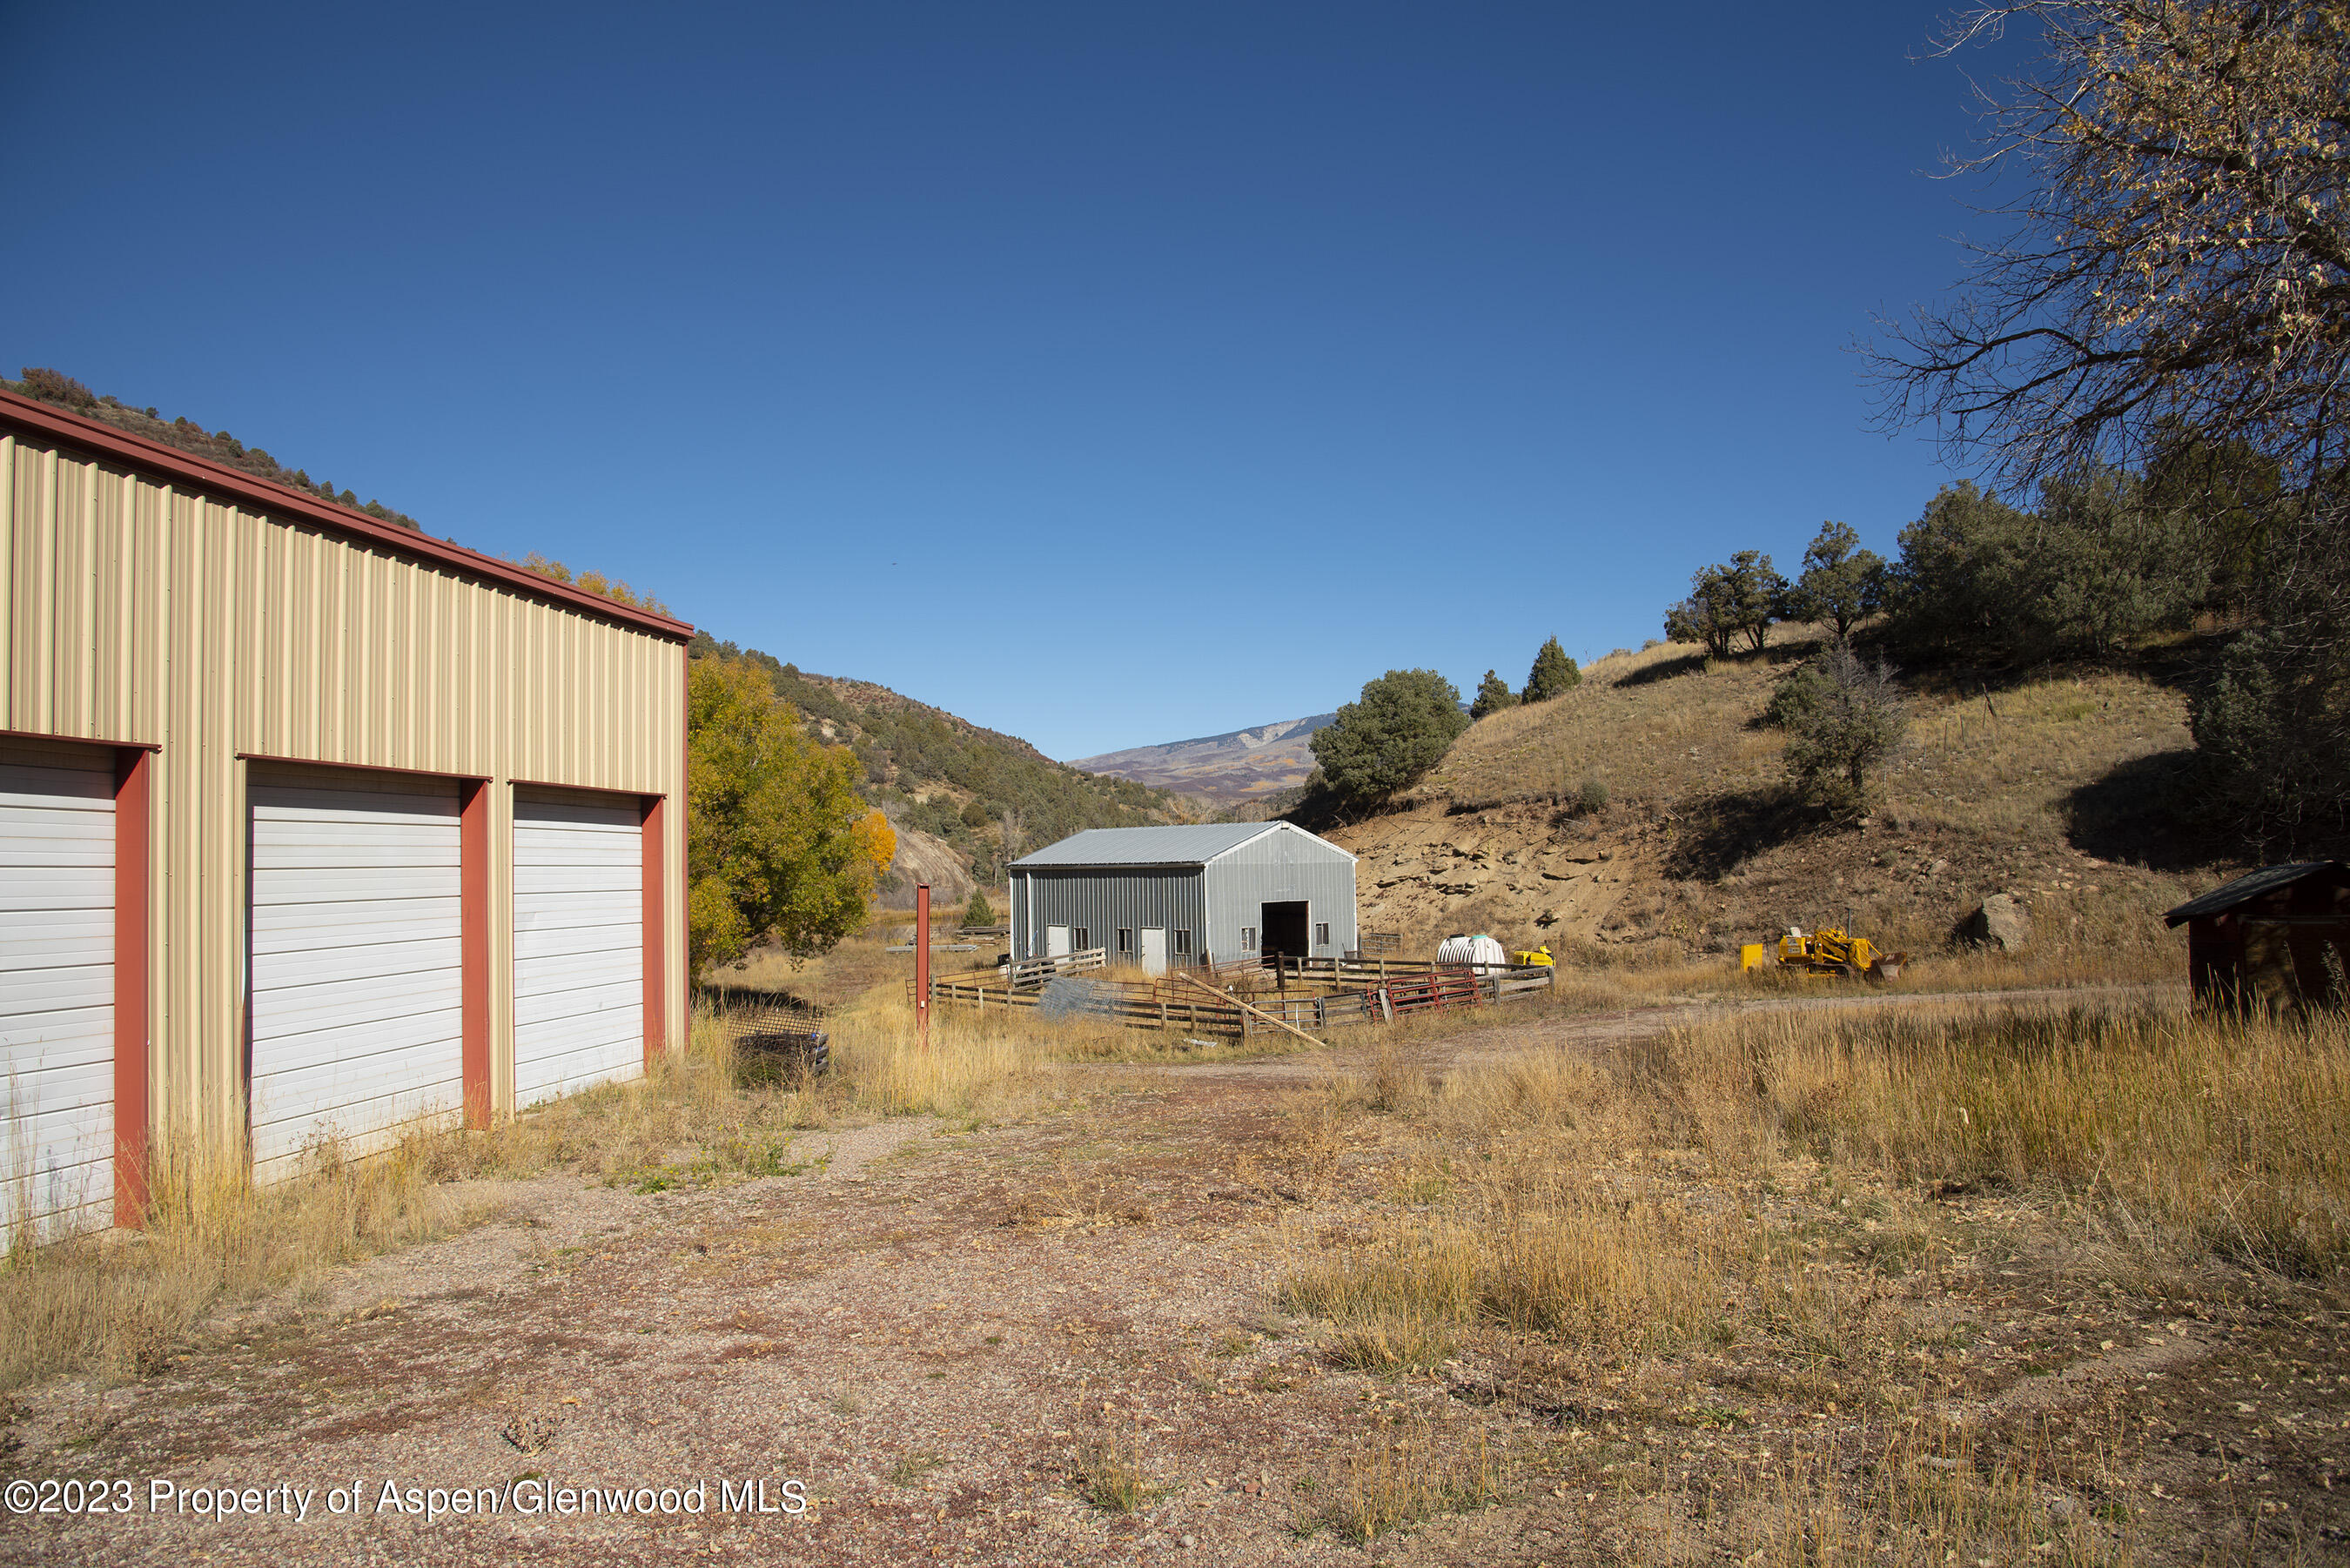 19331 Co-133, Somerset, Colorado, 81434, United States, ,Land,For Sale,19331 Co-133,1437570